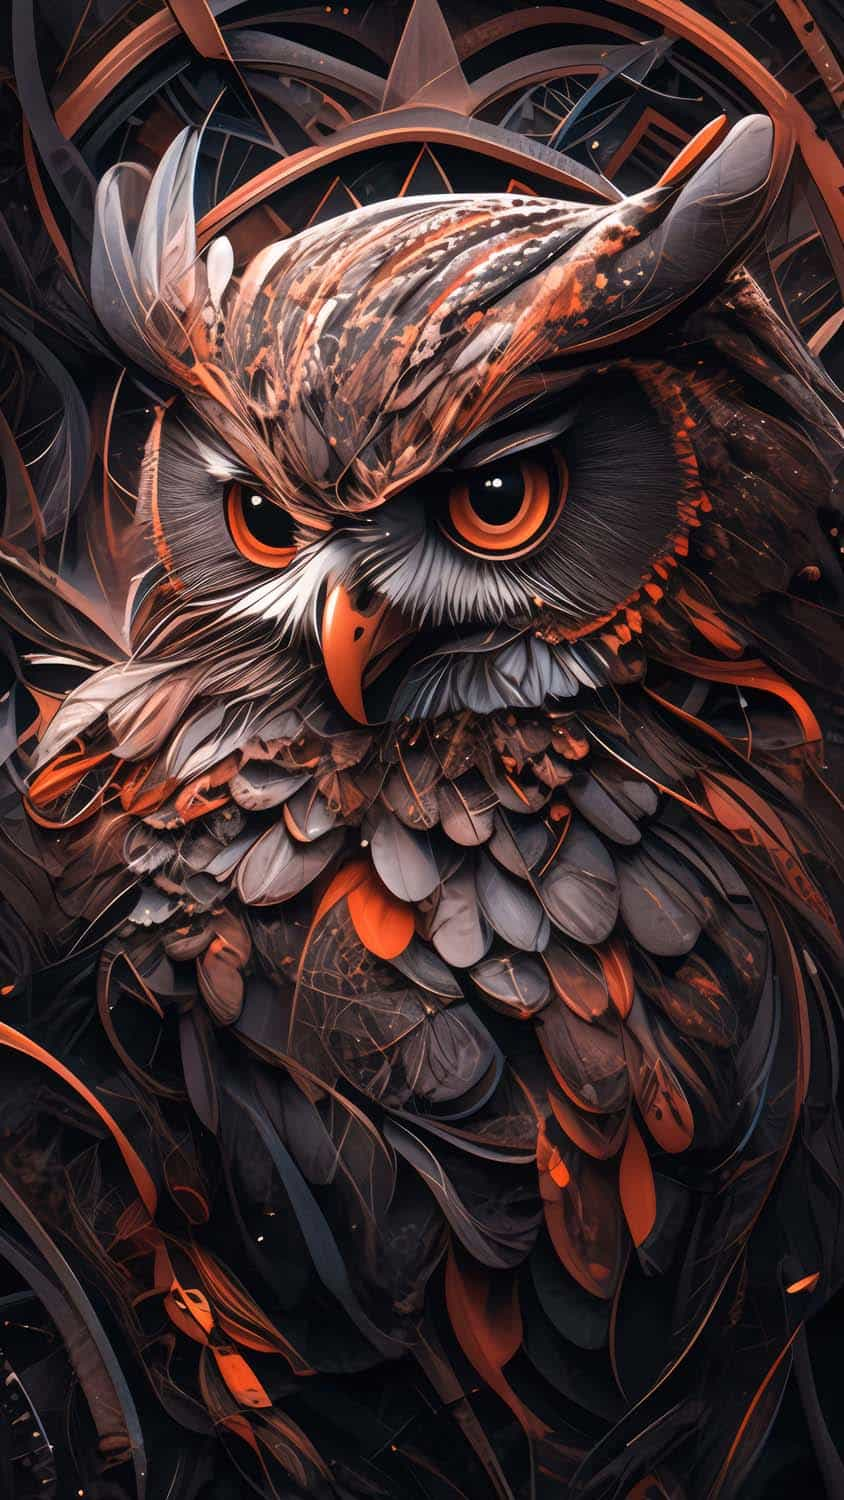 Download wallpaper 240x320 owl dark glowing eyes muzzle old mobile  cell phone smartphone 240x320 hd image background 10249